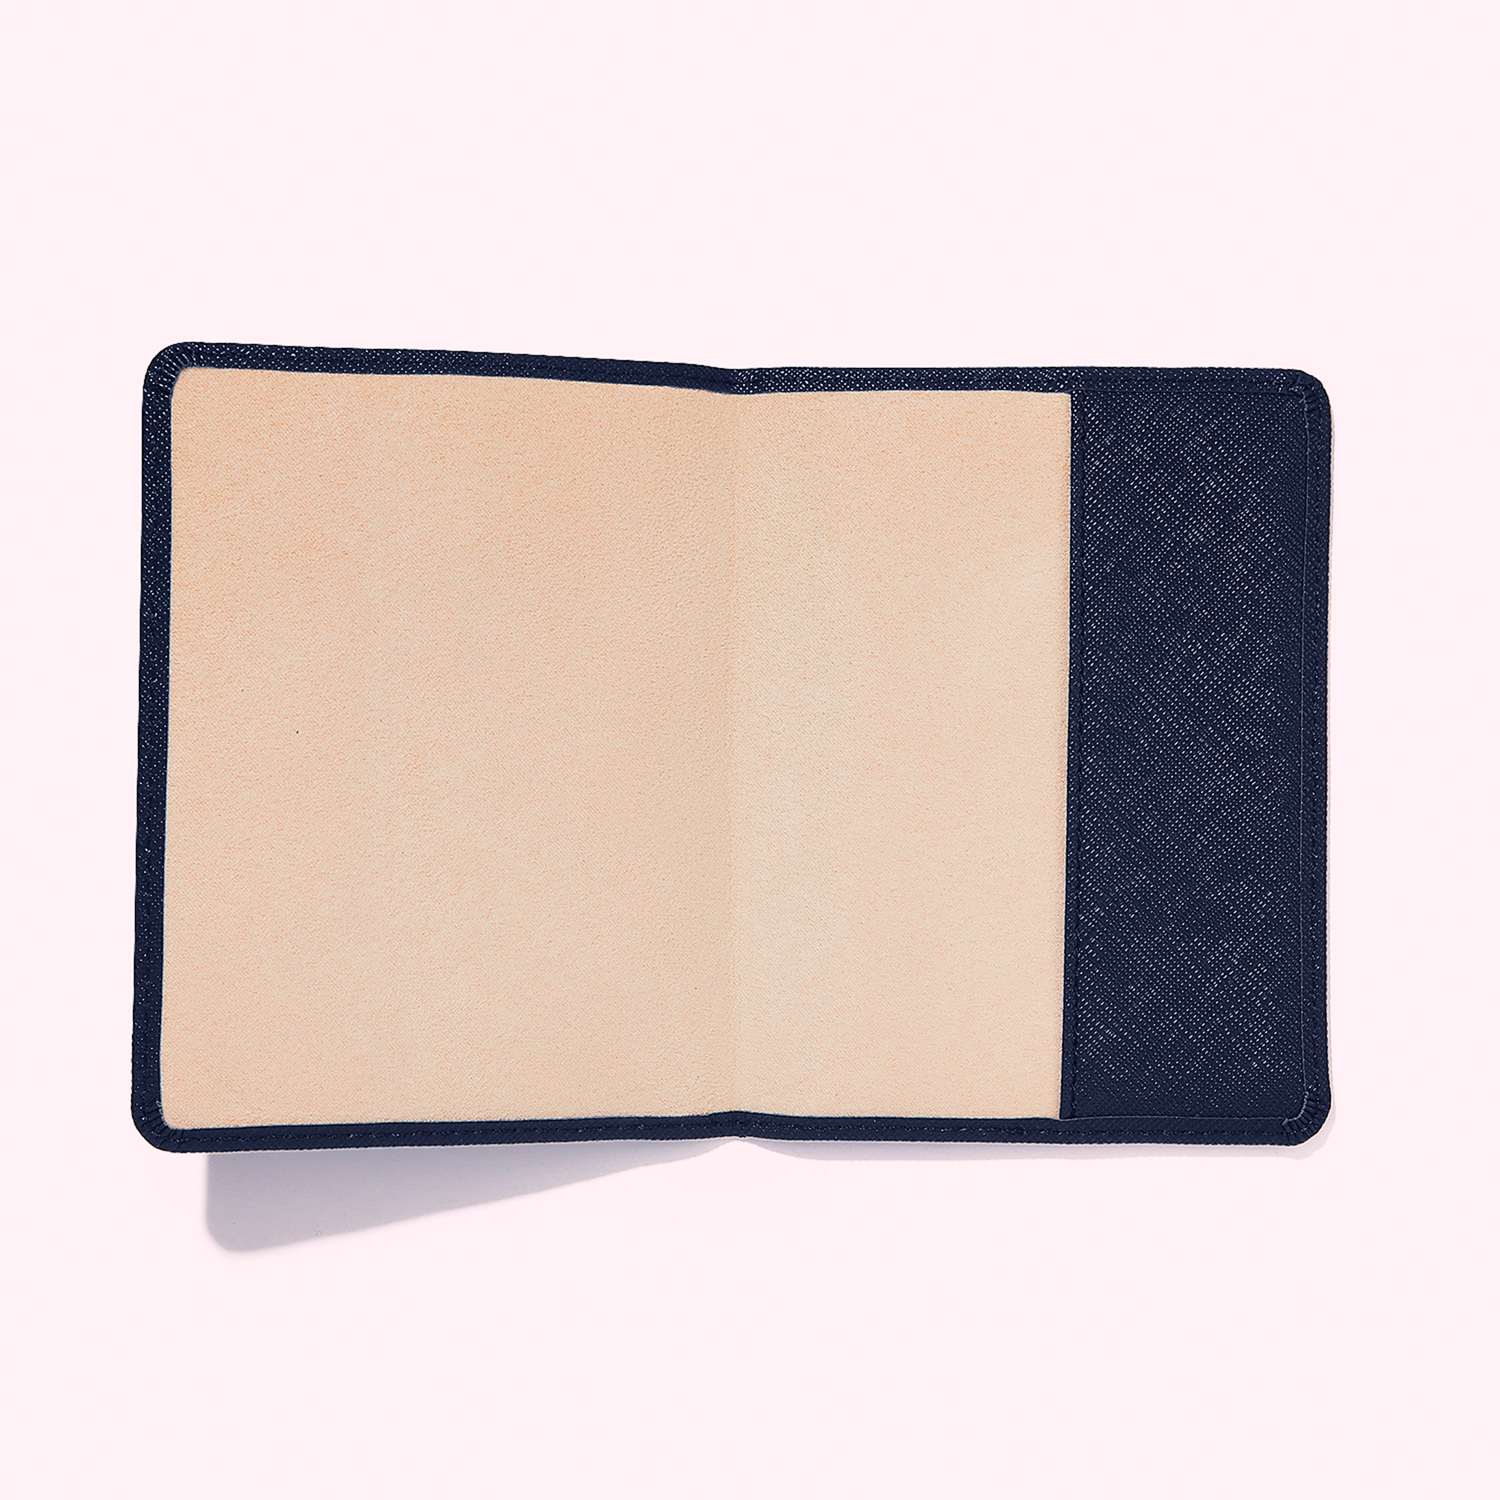 Buy Customized Travel Wallet Passport Cover Online in India Pink